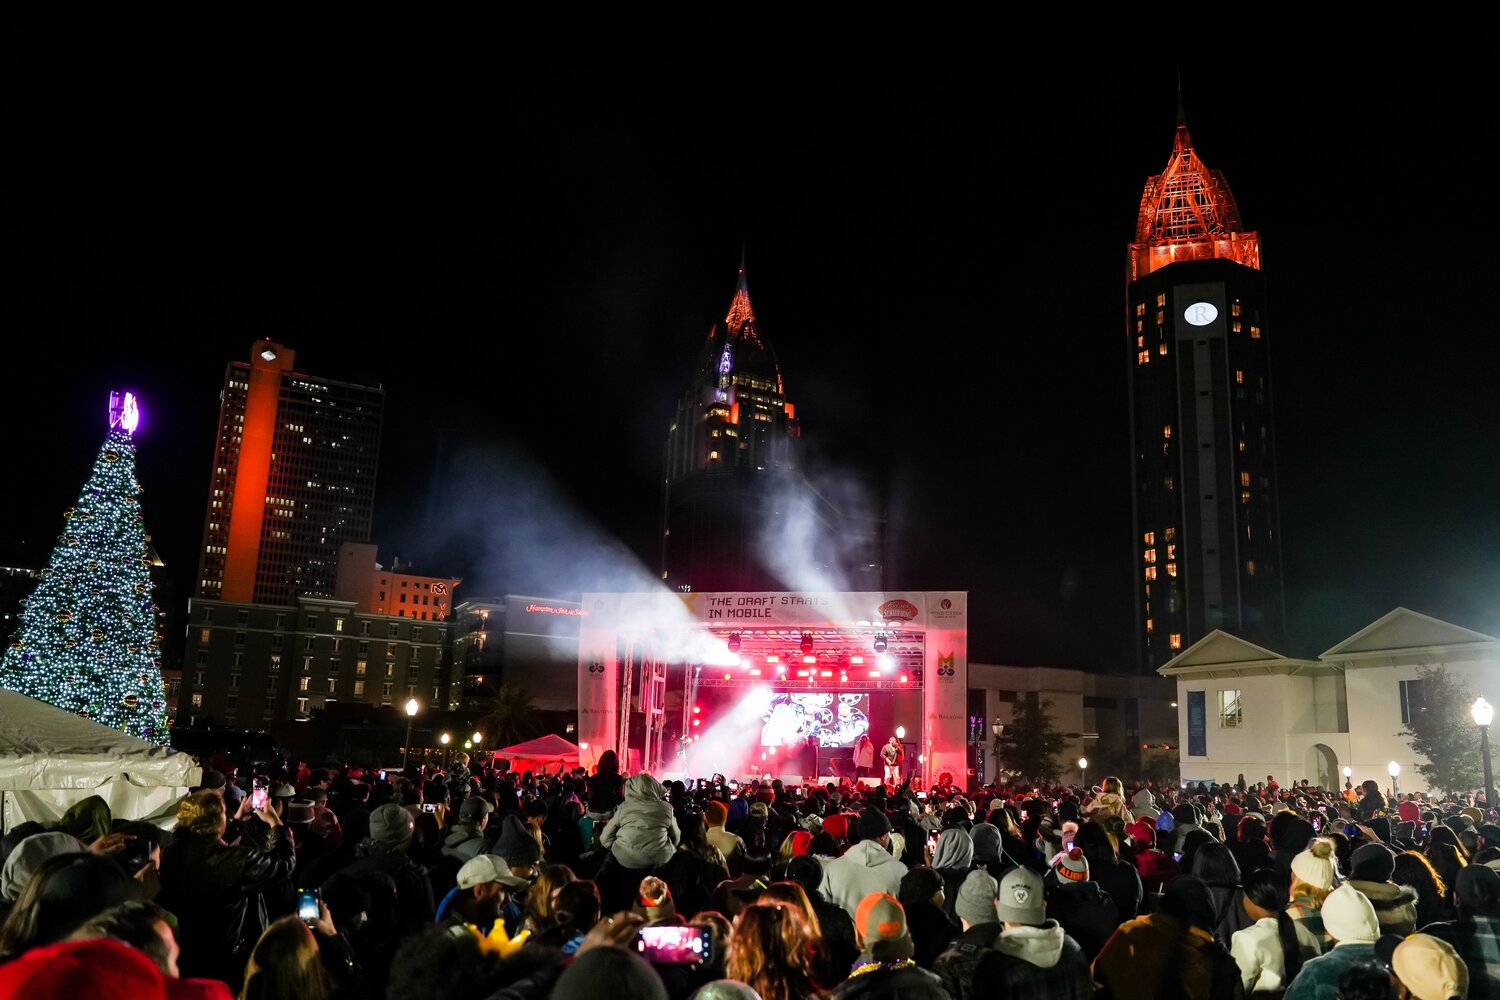 Last year’s free concert during Senior Bowl week featured Nelly at Mardi Gras Park in downtown Mobile. This year’s event was moved to Saturday night and will follow the evening’s carnival parades.